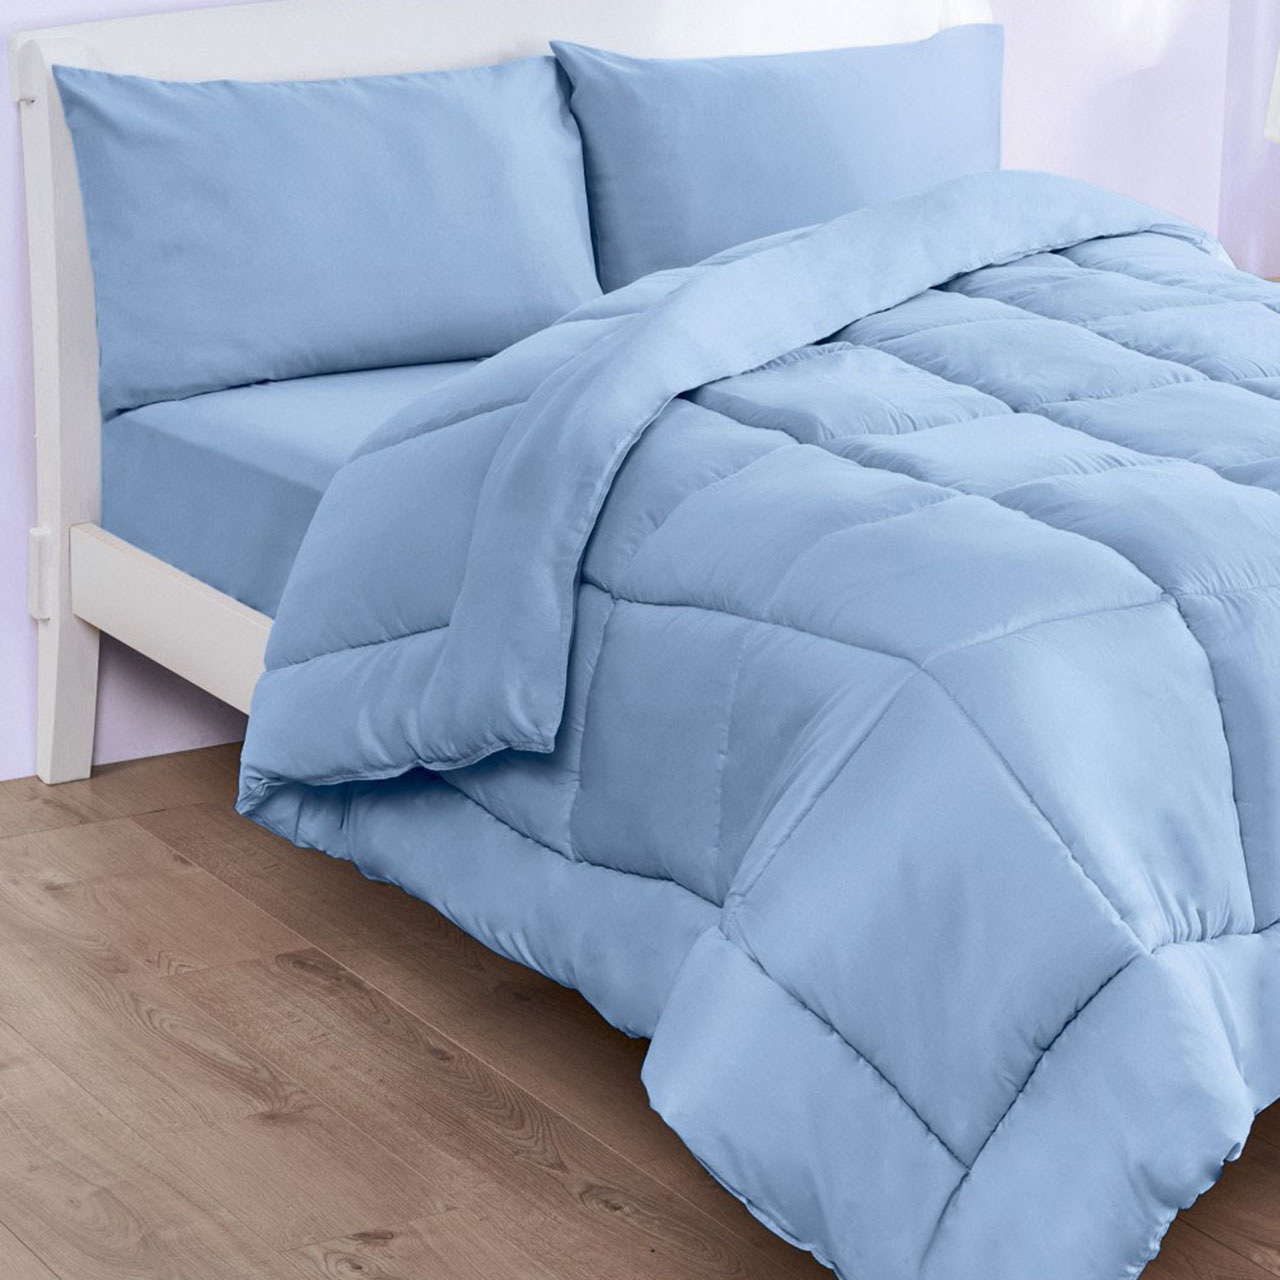 All-in-One Coverless Duvet and Bedding Bundle - 4.5 Tog